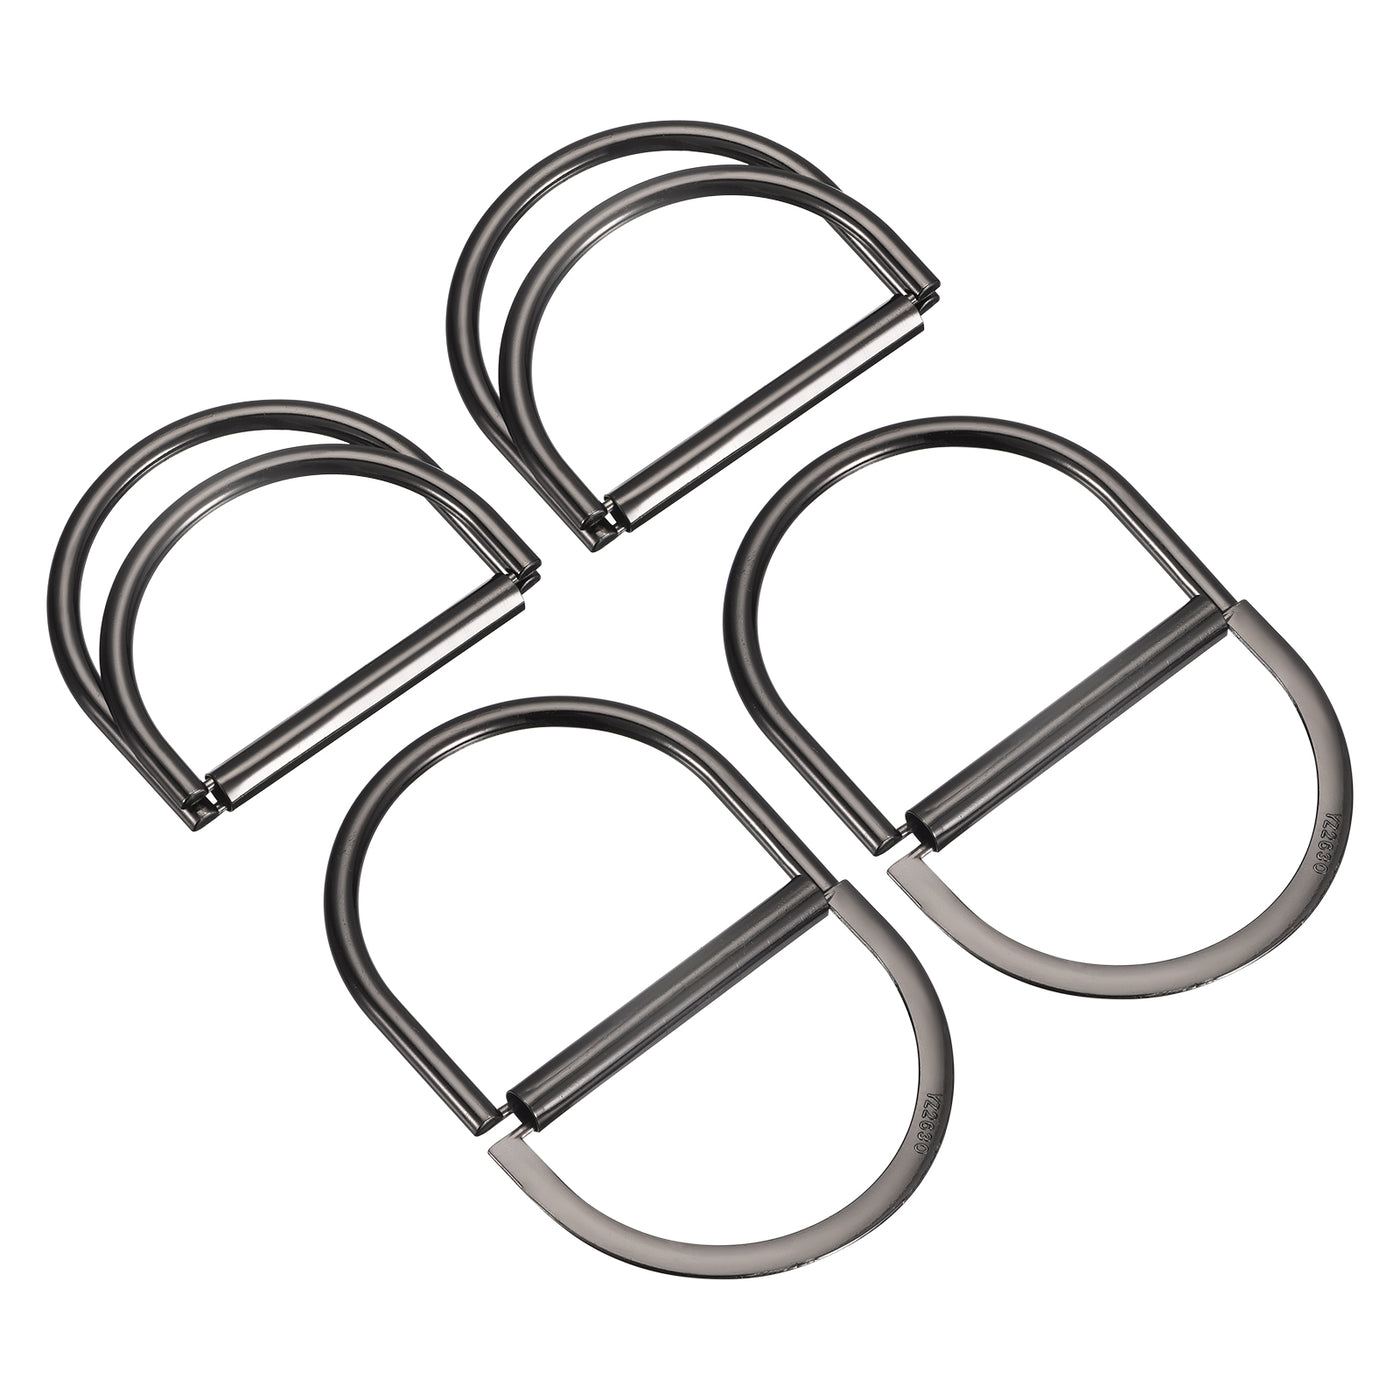 uxcell Uxcell Double D-Ring Buckles, 4pcs 60mm(2.36") Metal Adjustable D Rings, Dark Gray